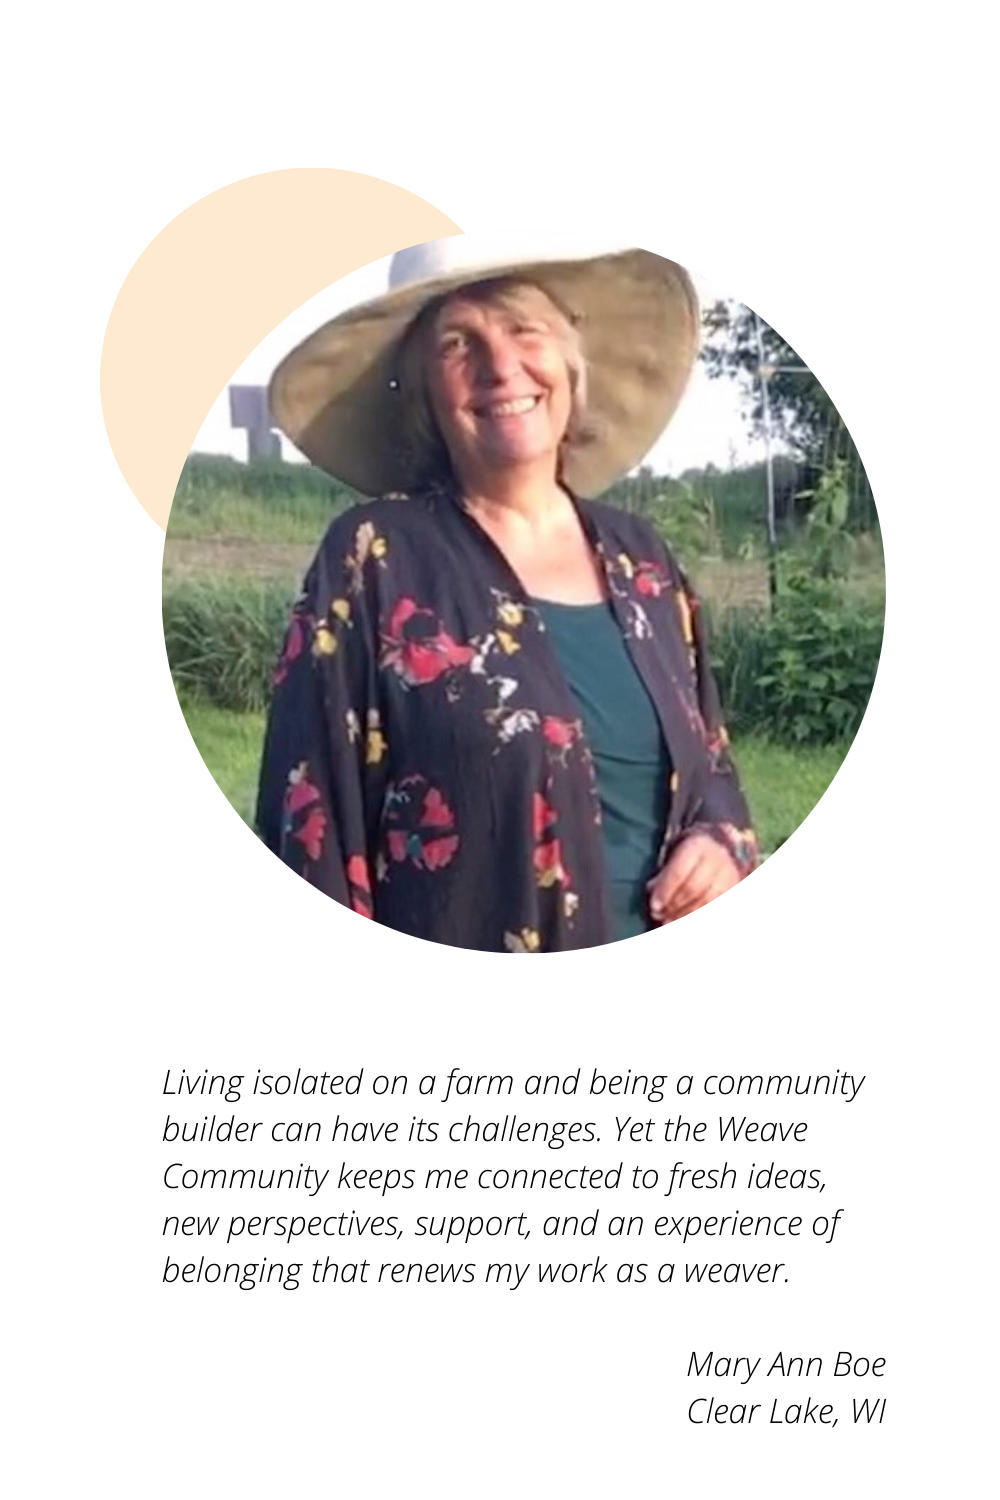 Mary Ann Boe of Clear Lake, WI: Living isolated on a farm and being a community builder can have its challenges. Yet the Weave Community keeps me connected to fresh ideas, new perspectives, support, and an experience of belonging that renews my work as a weaver.